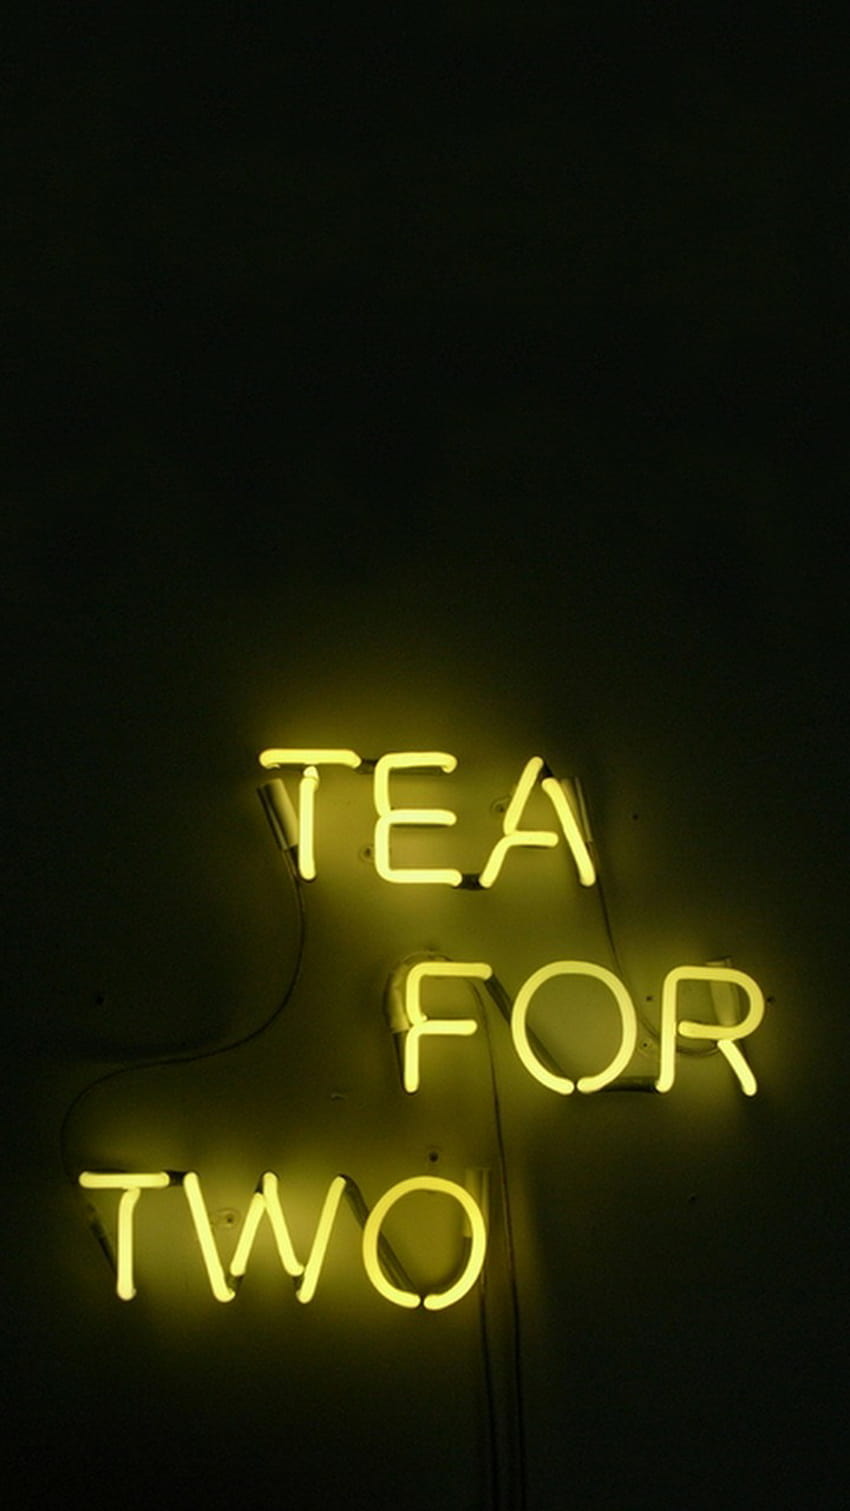 Tea for Two - Light yellow